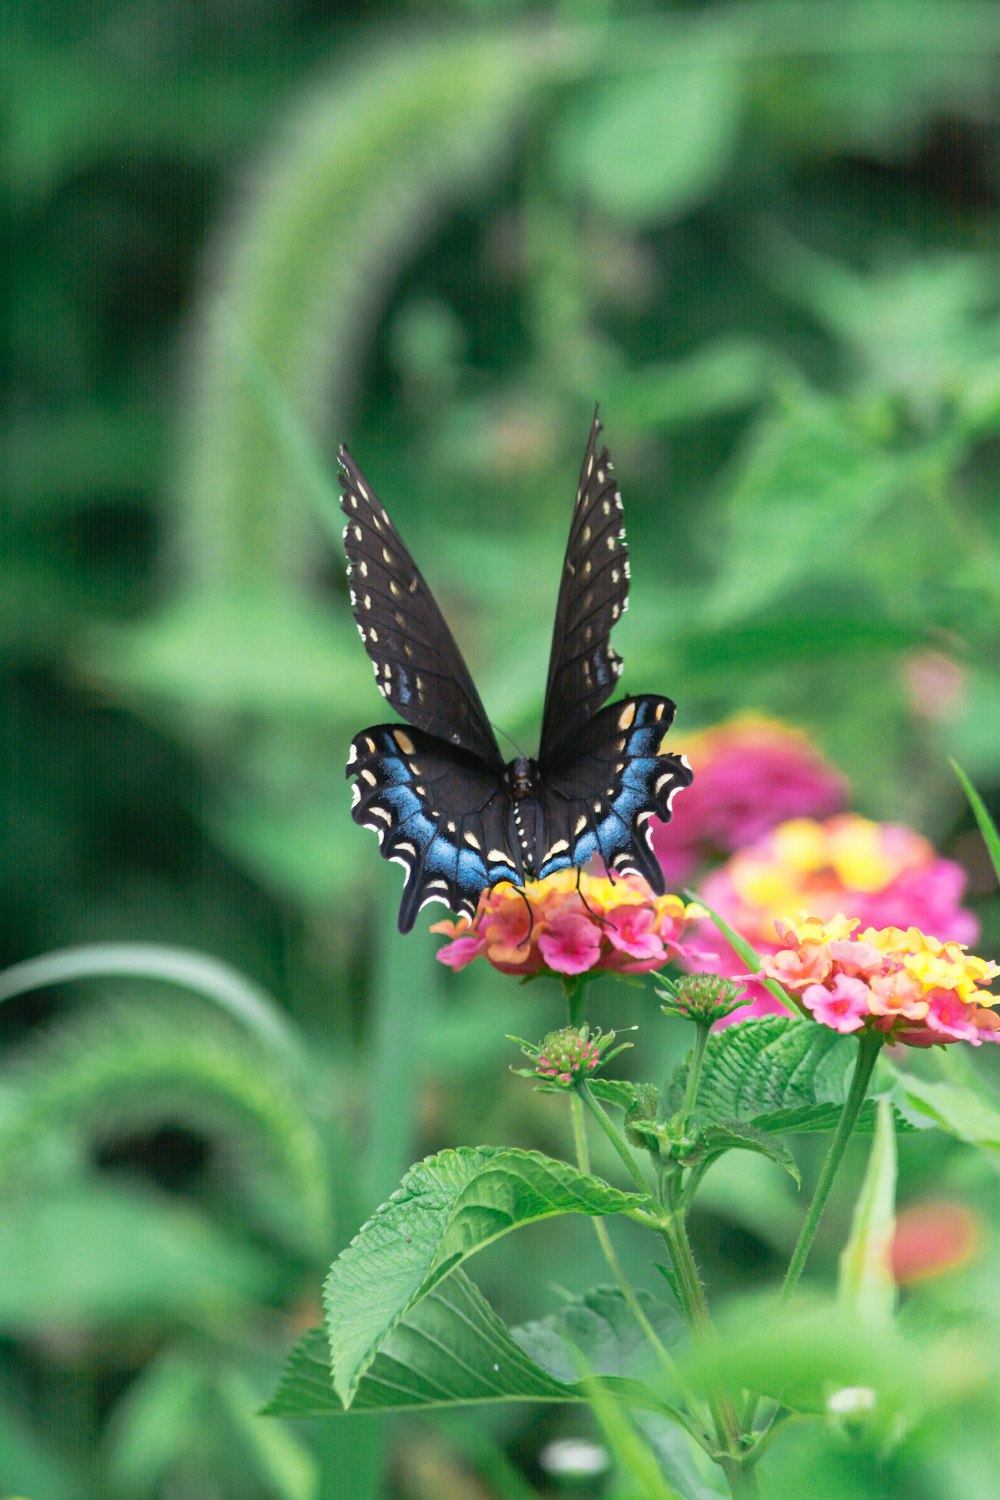 black and blue butterfly perched on yellow and pink flower in close up photography during daytime